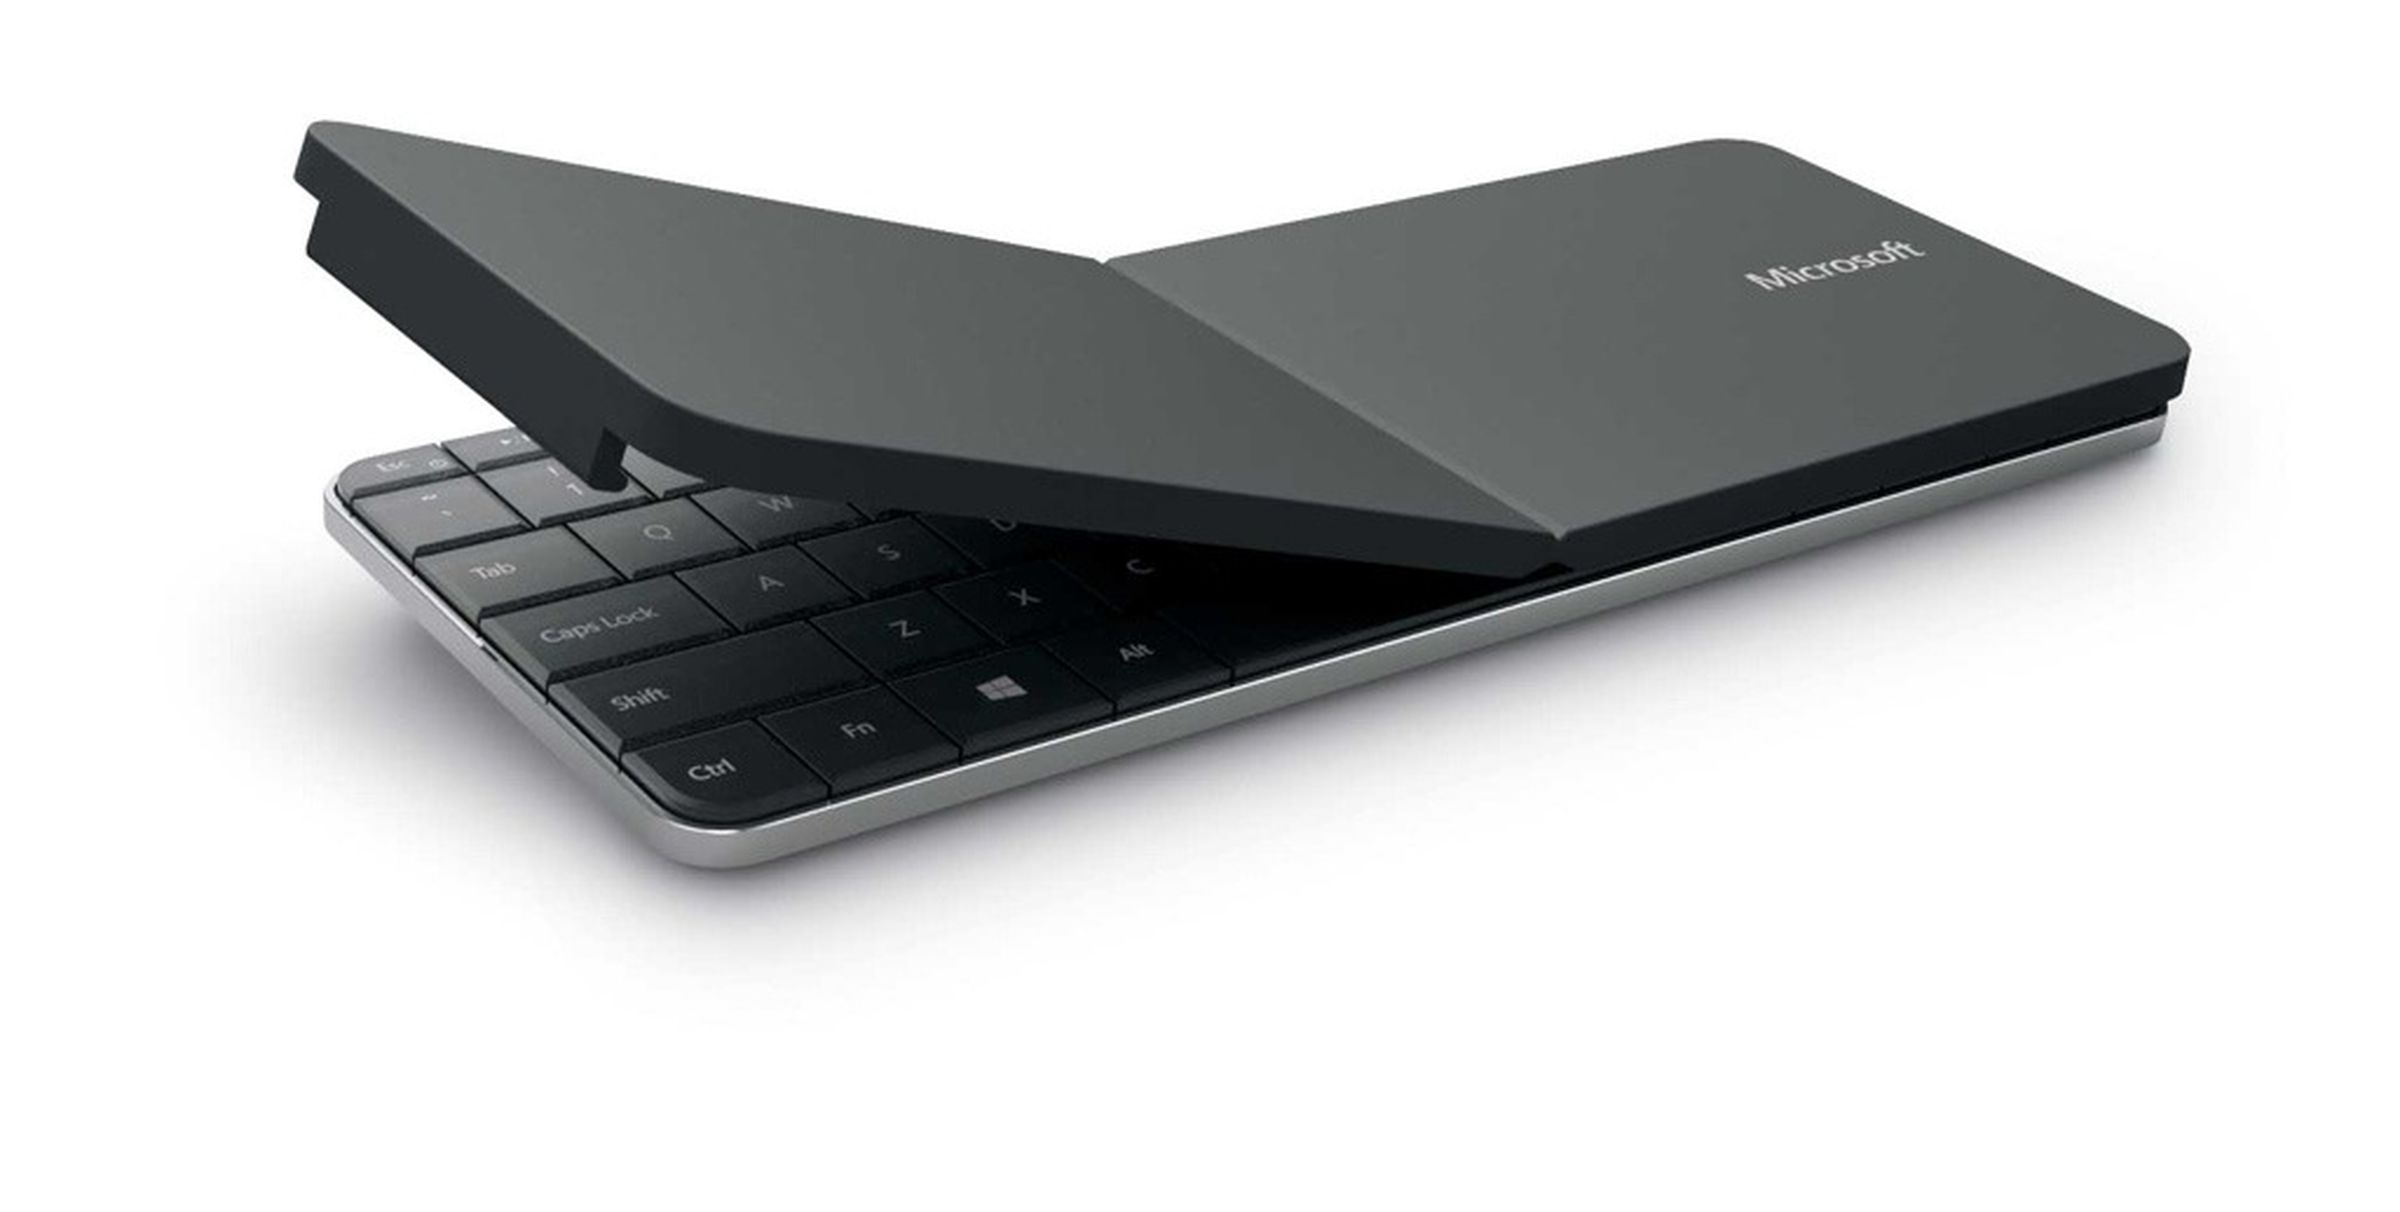 Microsoft Wedge Mobile keyboard official photos